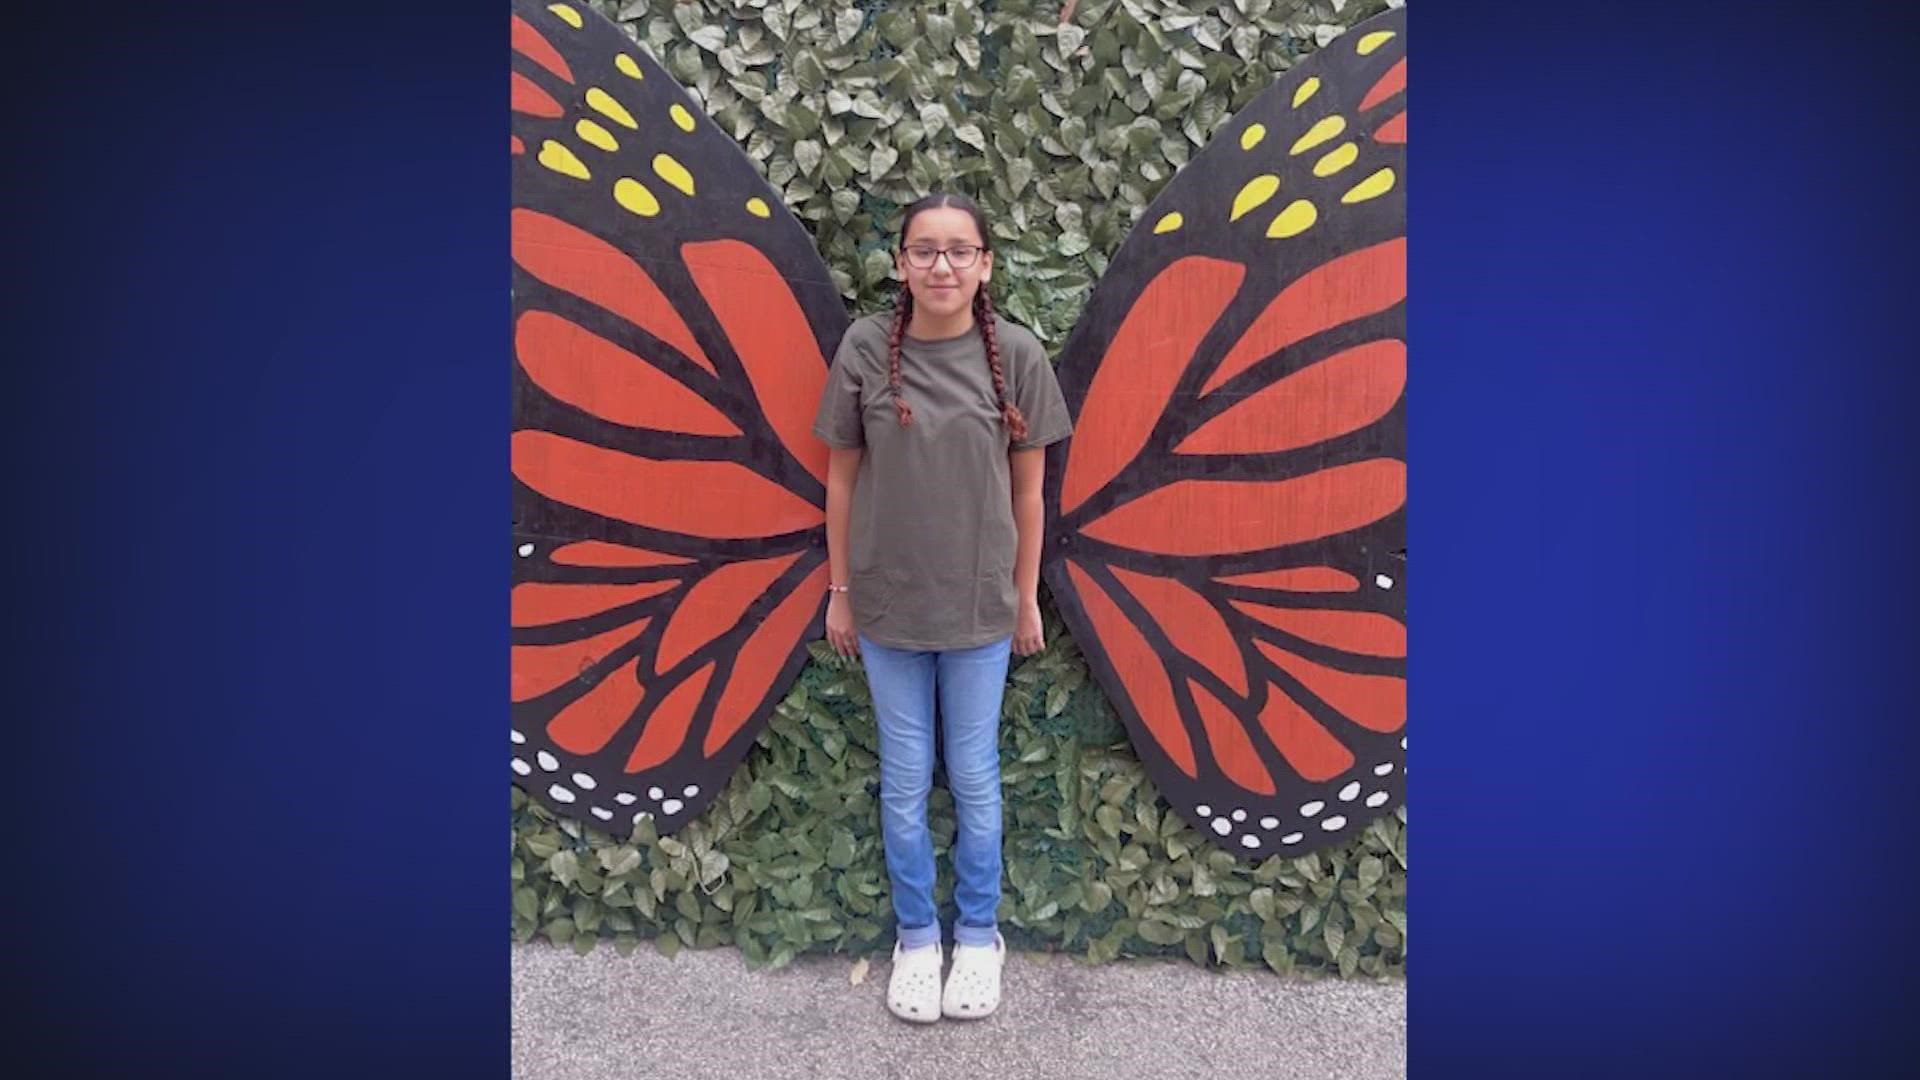 Miah Cerrillo, 11, was in the room when 19 of her classmates and two of her teachers were killed last week at a Uvalde elementary school.